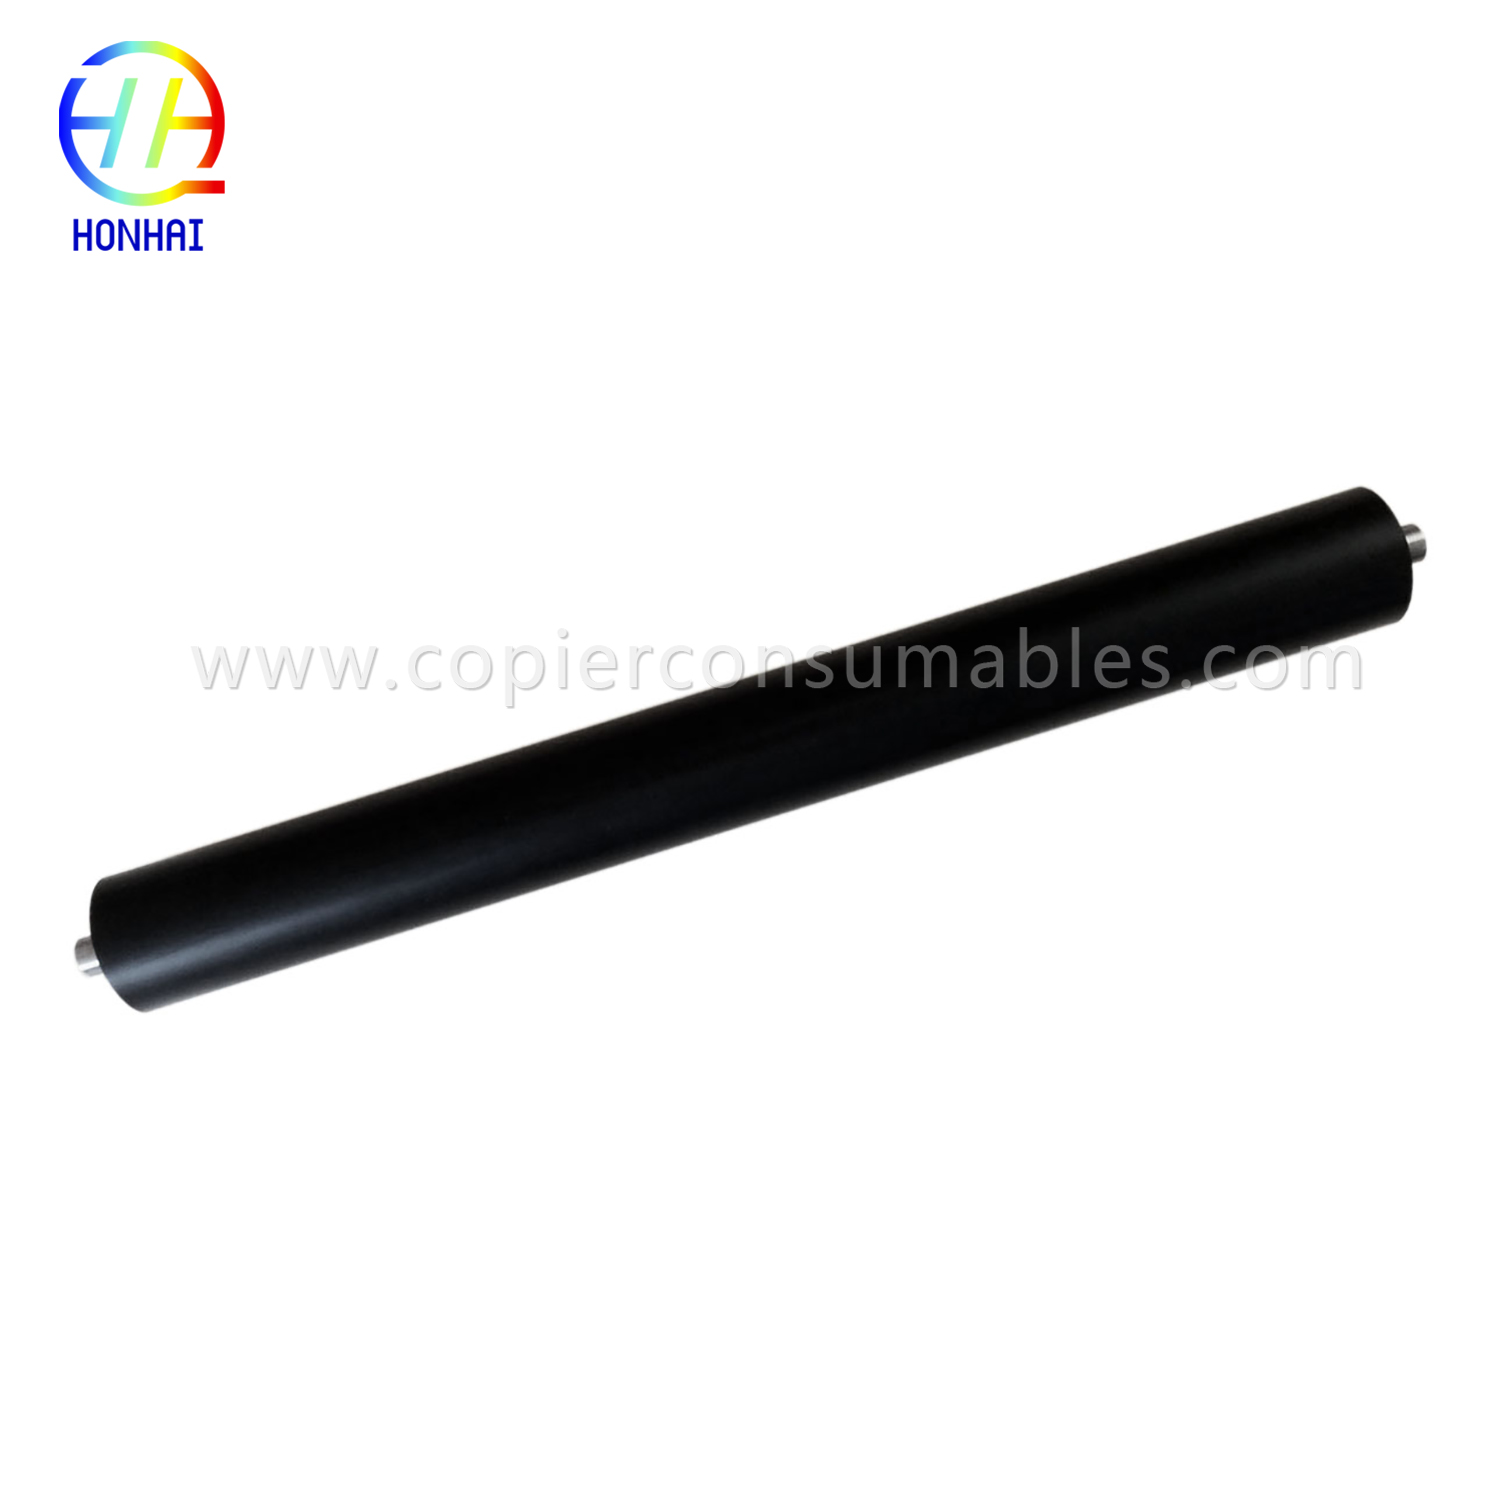 Lower Pressure Roller for Xerox WC175 5632 5645 5638 5645 5632 5655 5675 5687